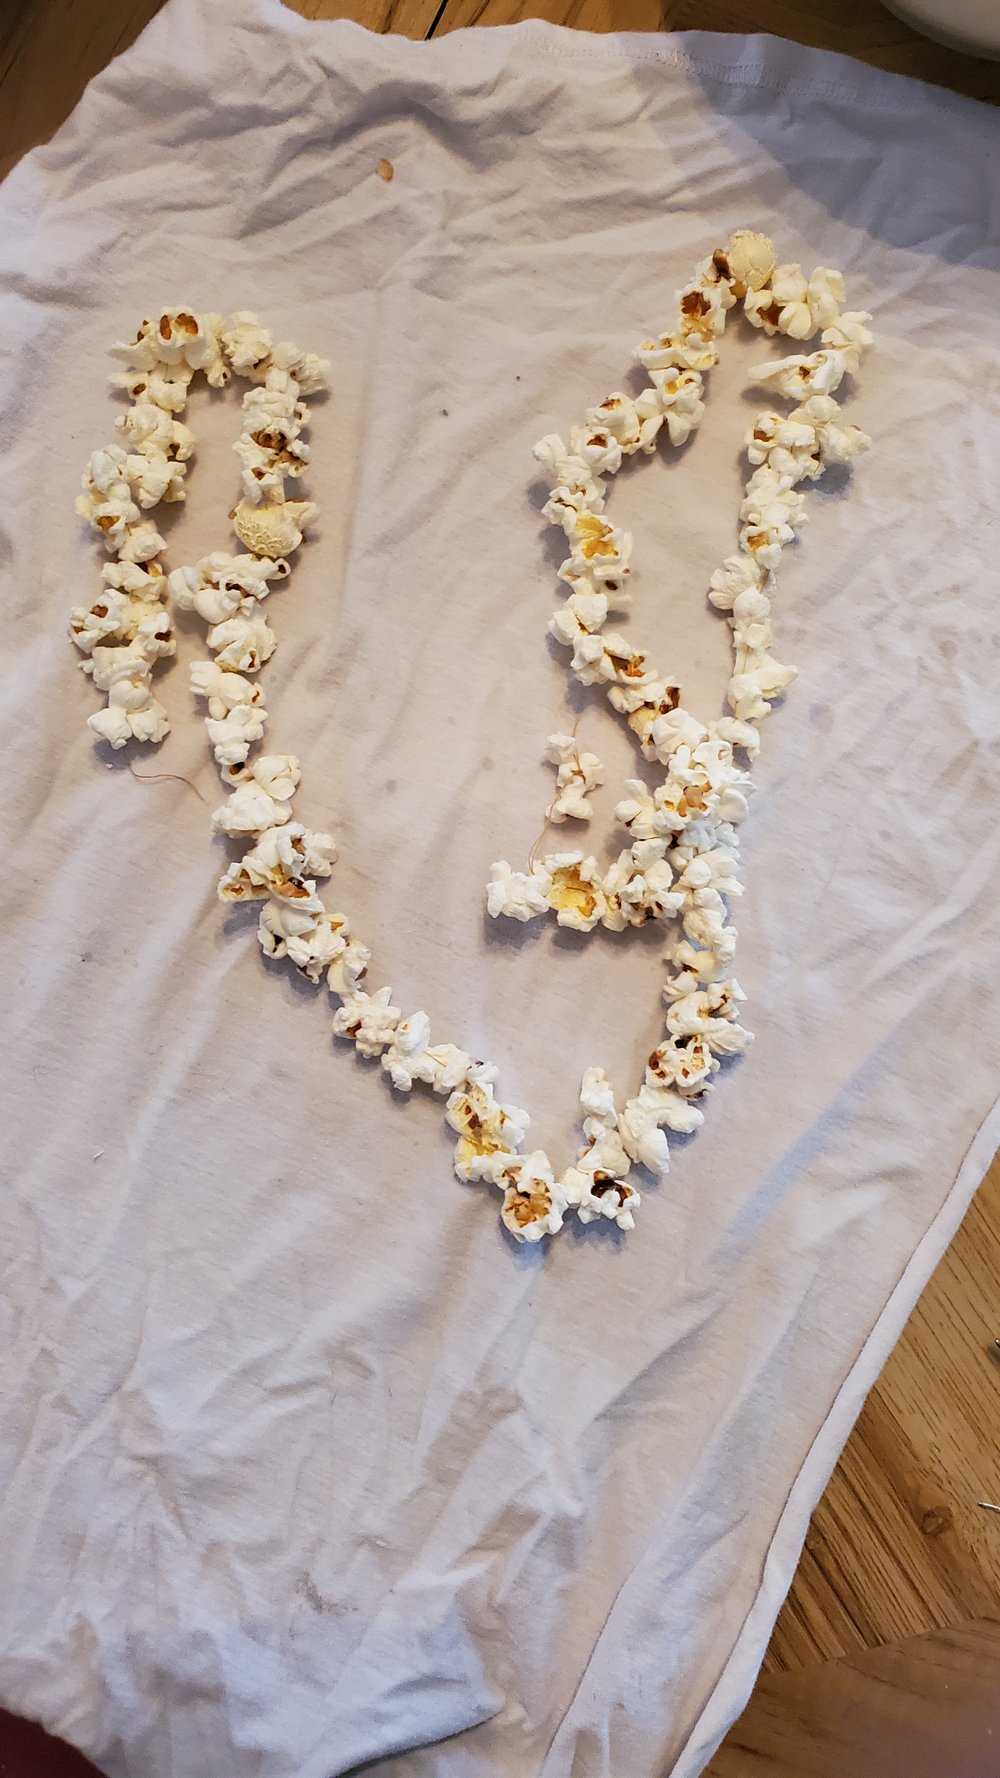  If you would like to preserve your popcorn garland, spray it with a craft sealant or finish. Make sure you do this on a drop cloth or newspaper so as not to make a mess. 